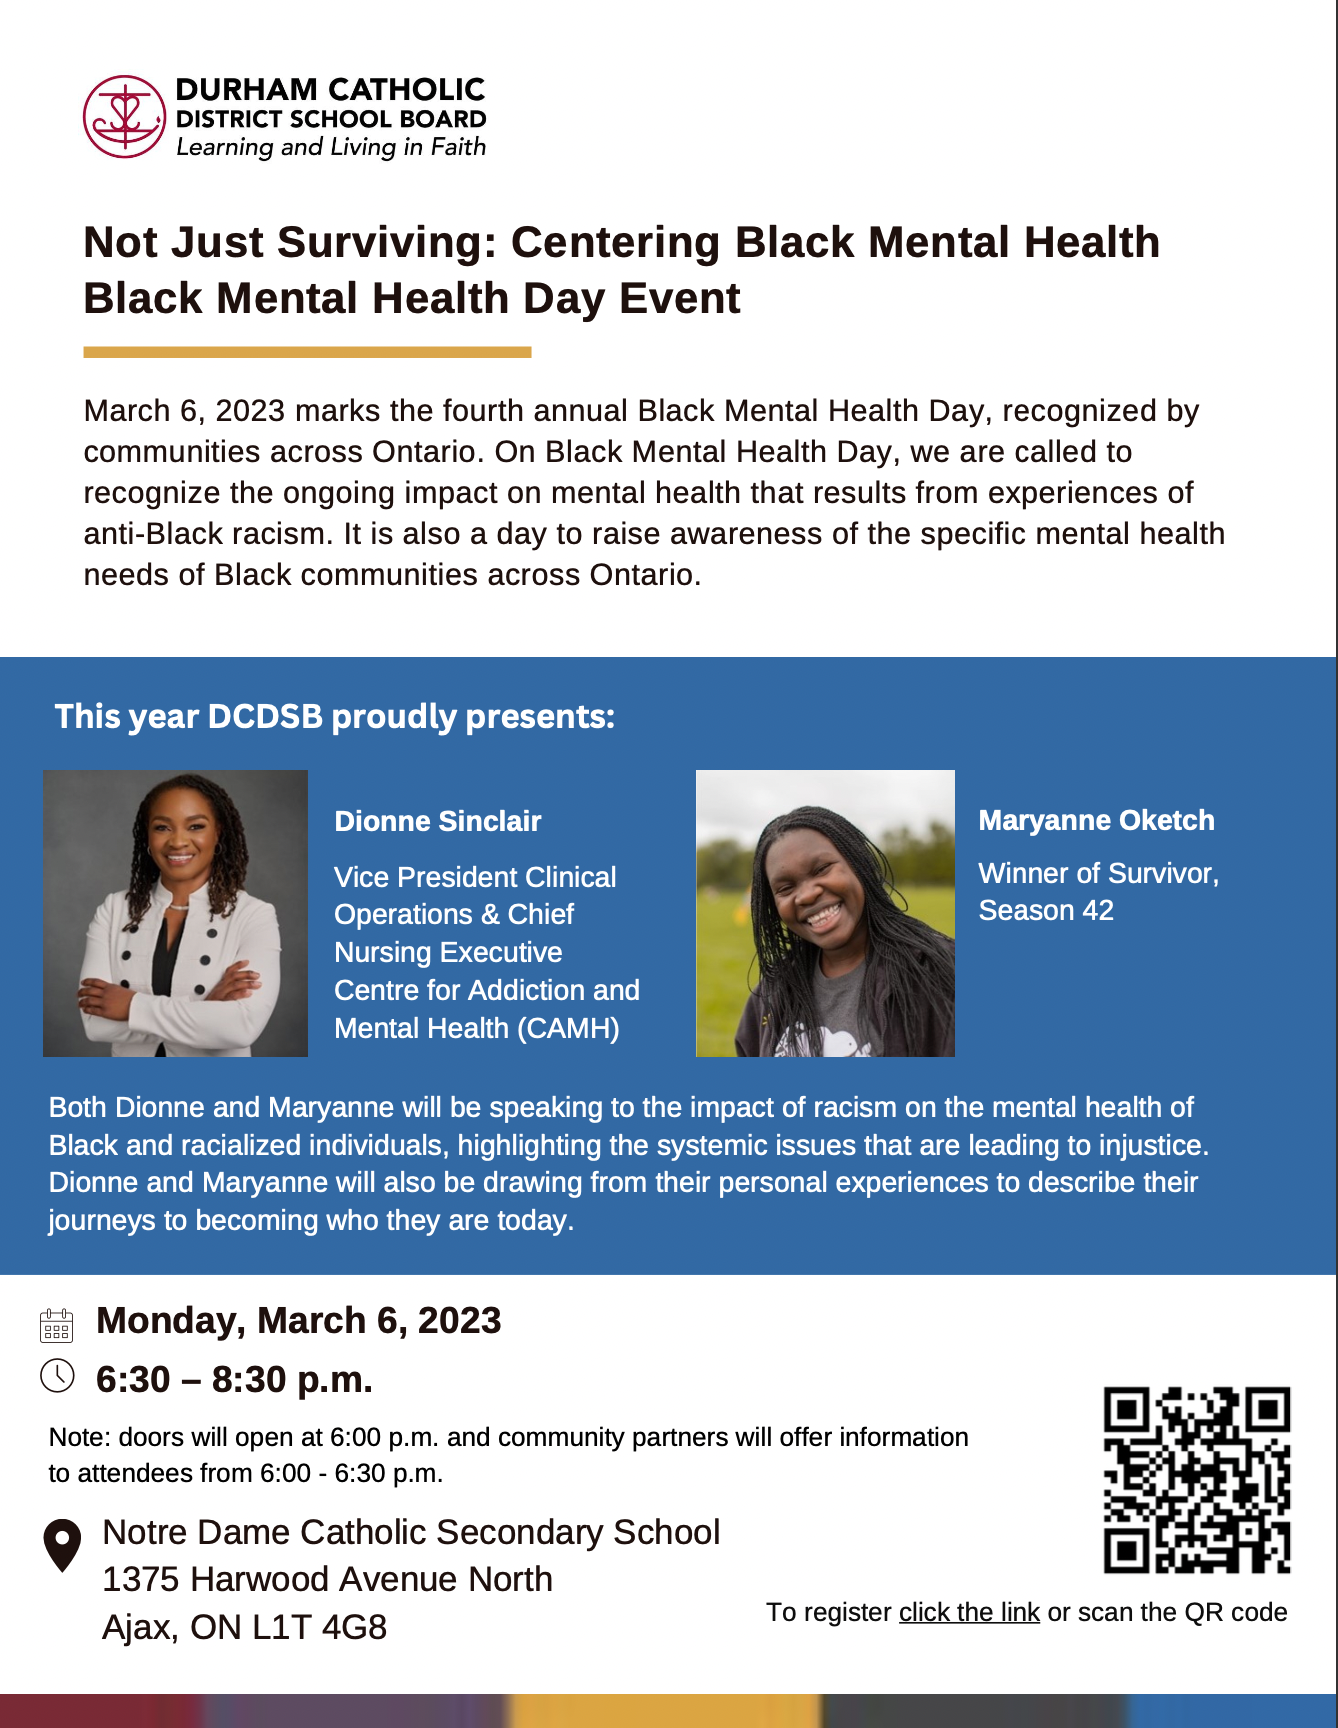 poster promoting the Not Just Surviving: Centering Black Mental Health Event